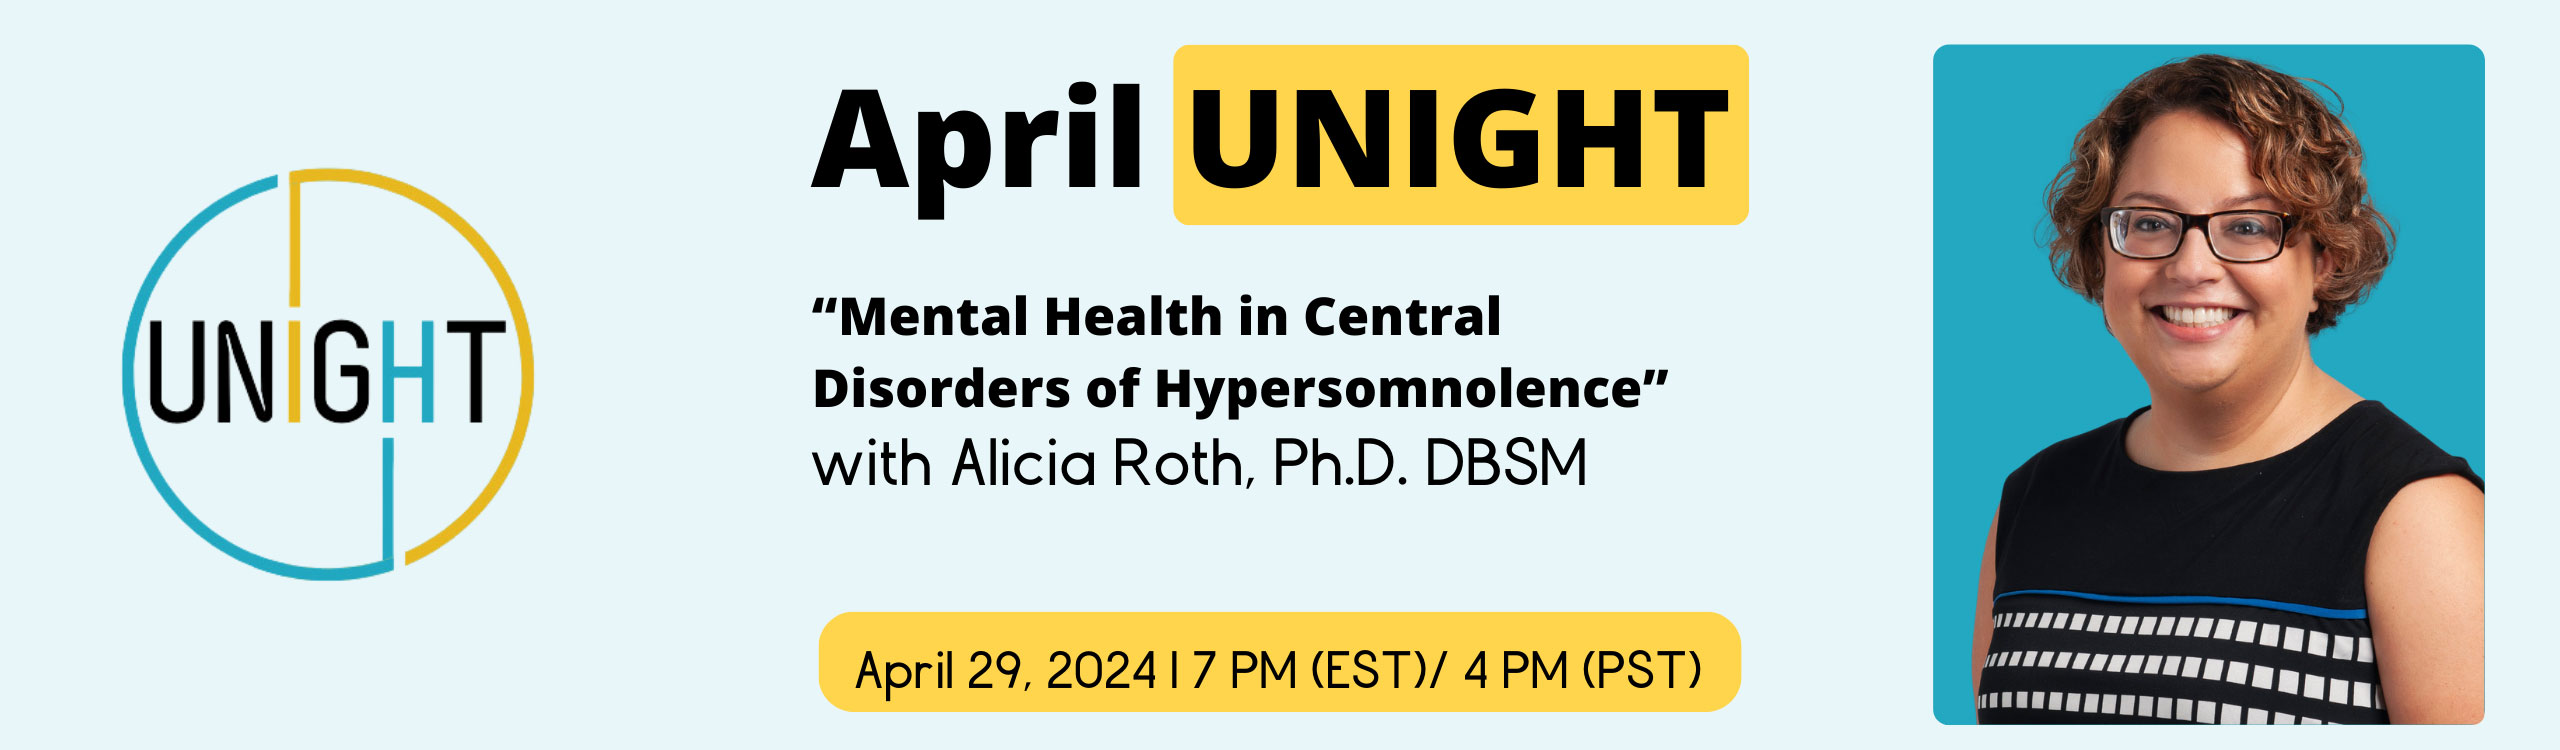 April UNIGHT - "Mental Health in Central Disorders of Hypersomnolence" with Alicia Roth, Ph.D. DBSM - April 29, 2024 | 7 PM (EST) / 4 PM (PST)